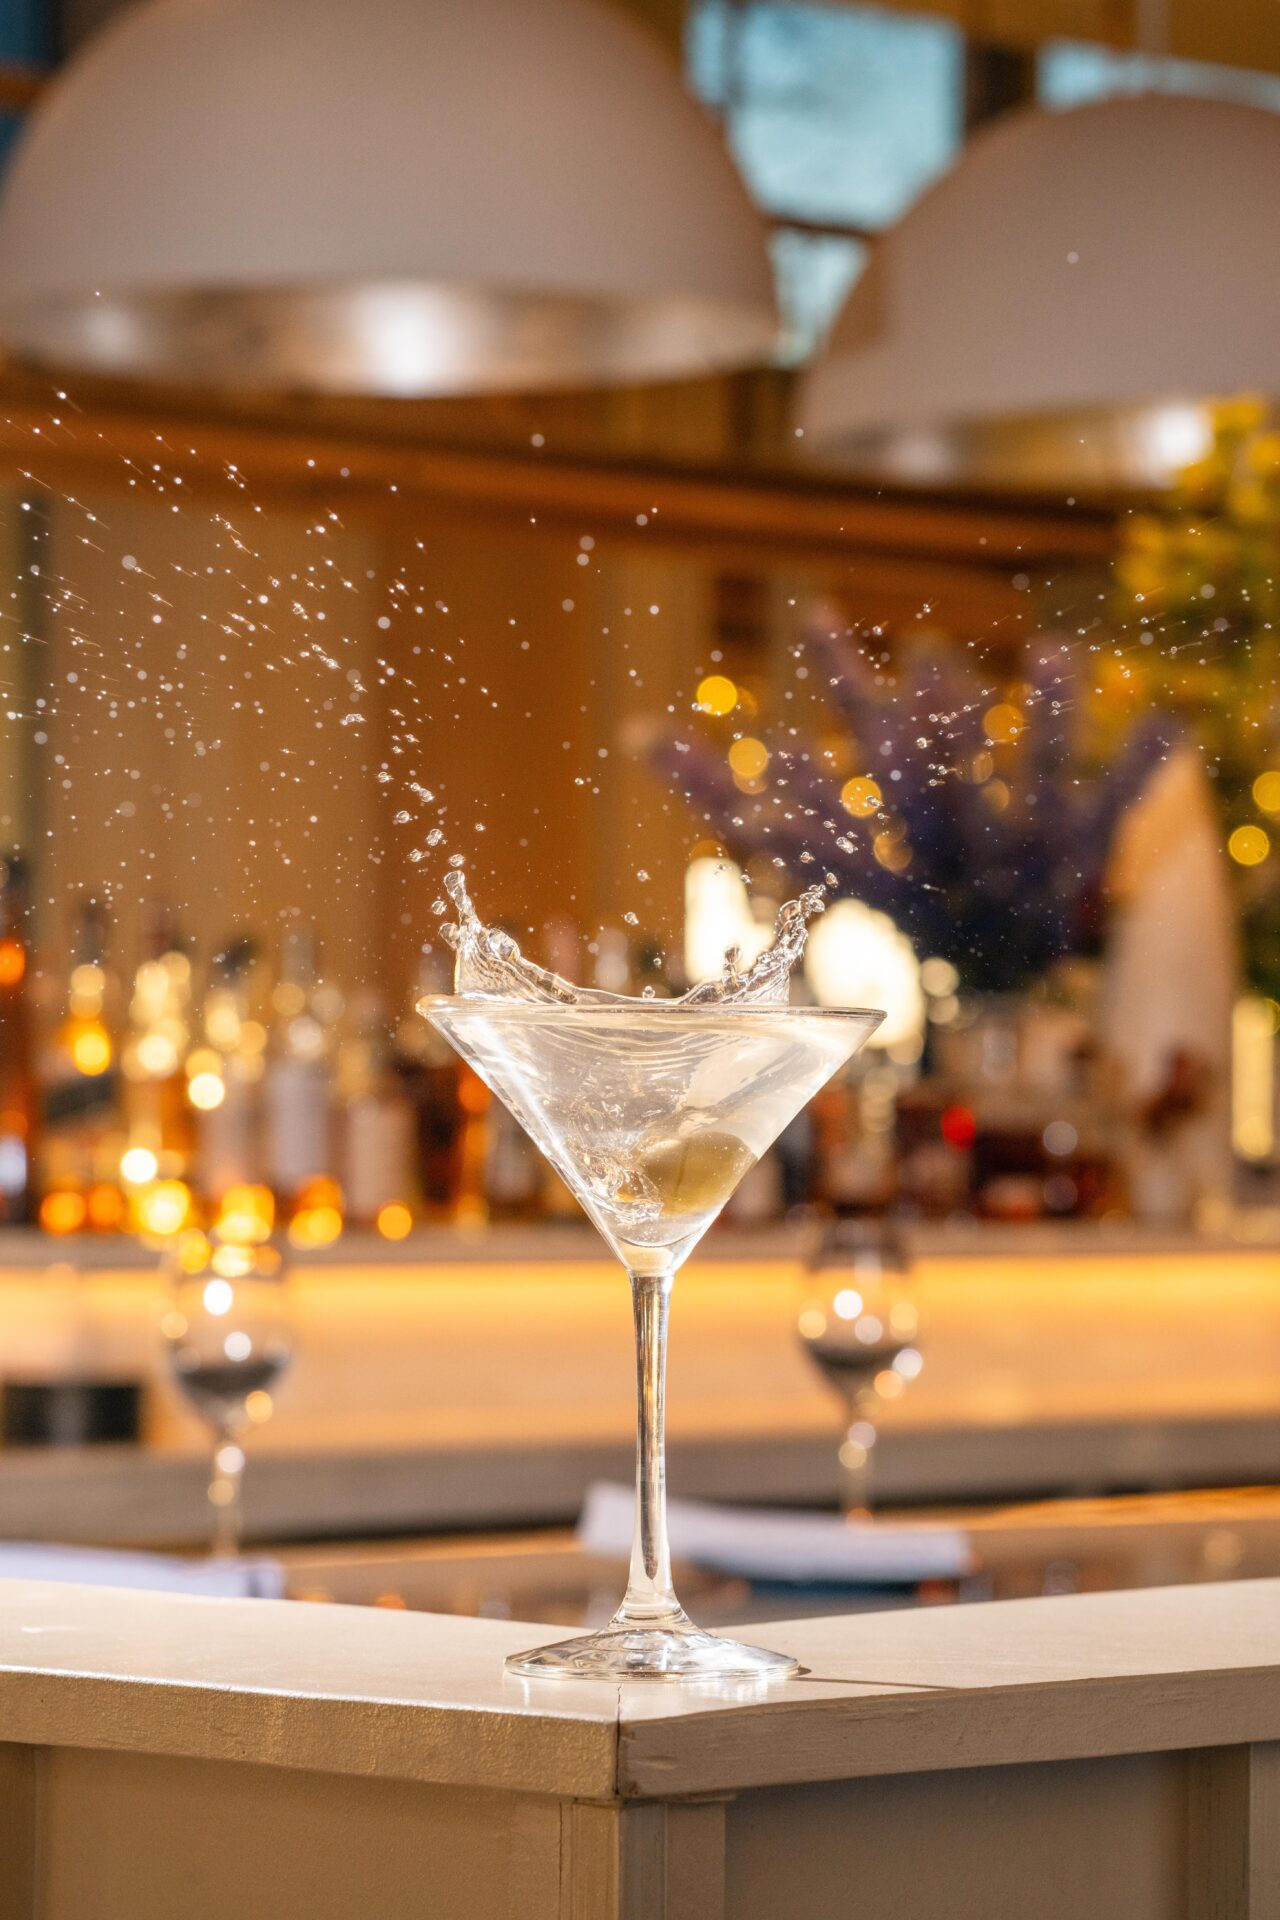 An olive makes a splash in a martini at The Finch, a hot new restaurant in Nashville